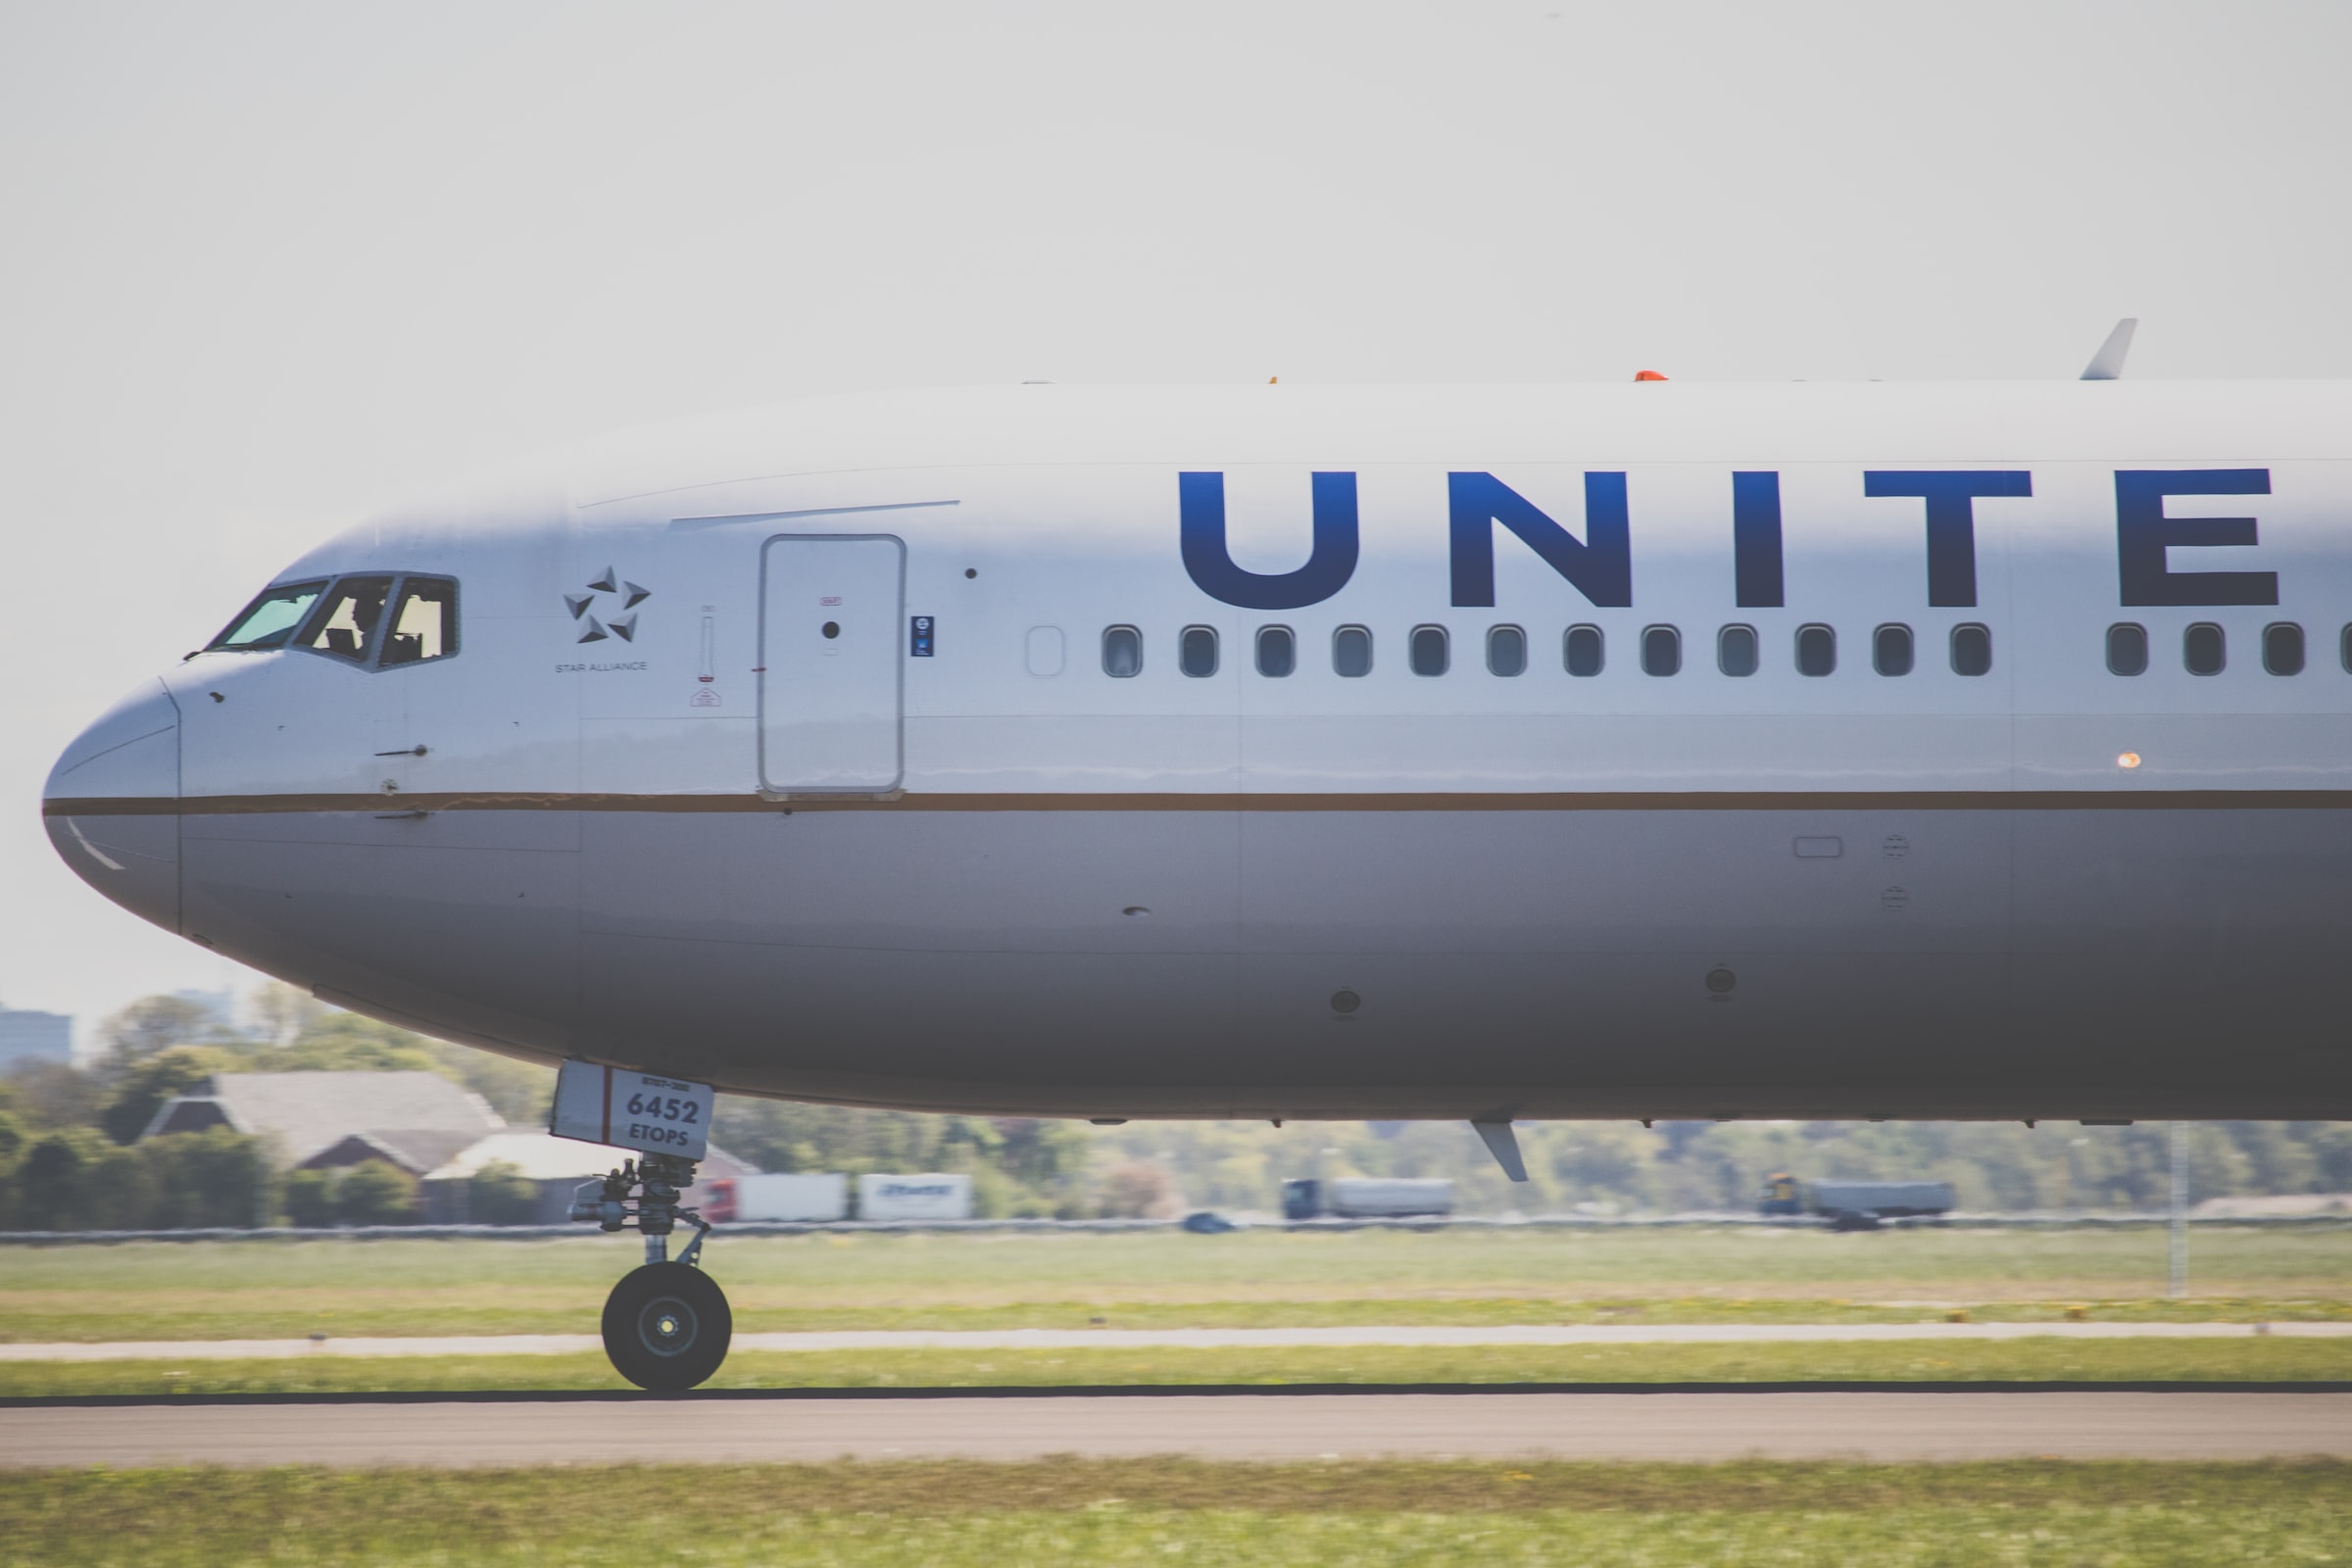 United Airlines Flew From O'Hare to Midway This Week - The Bulkhead Seat